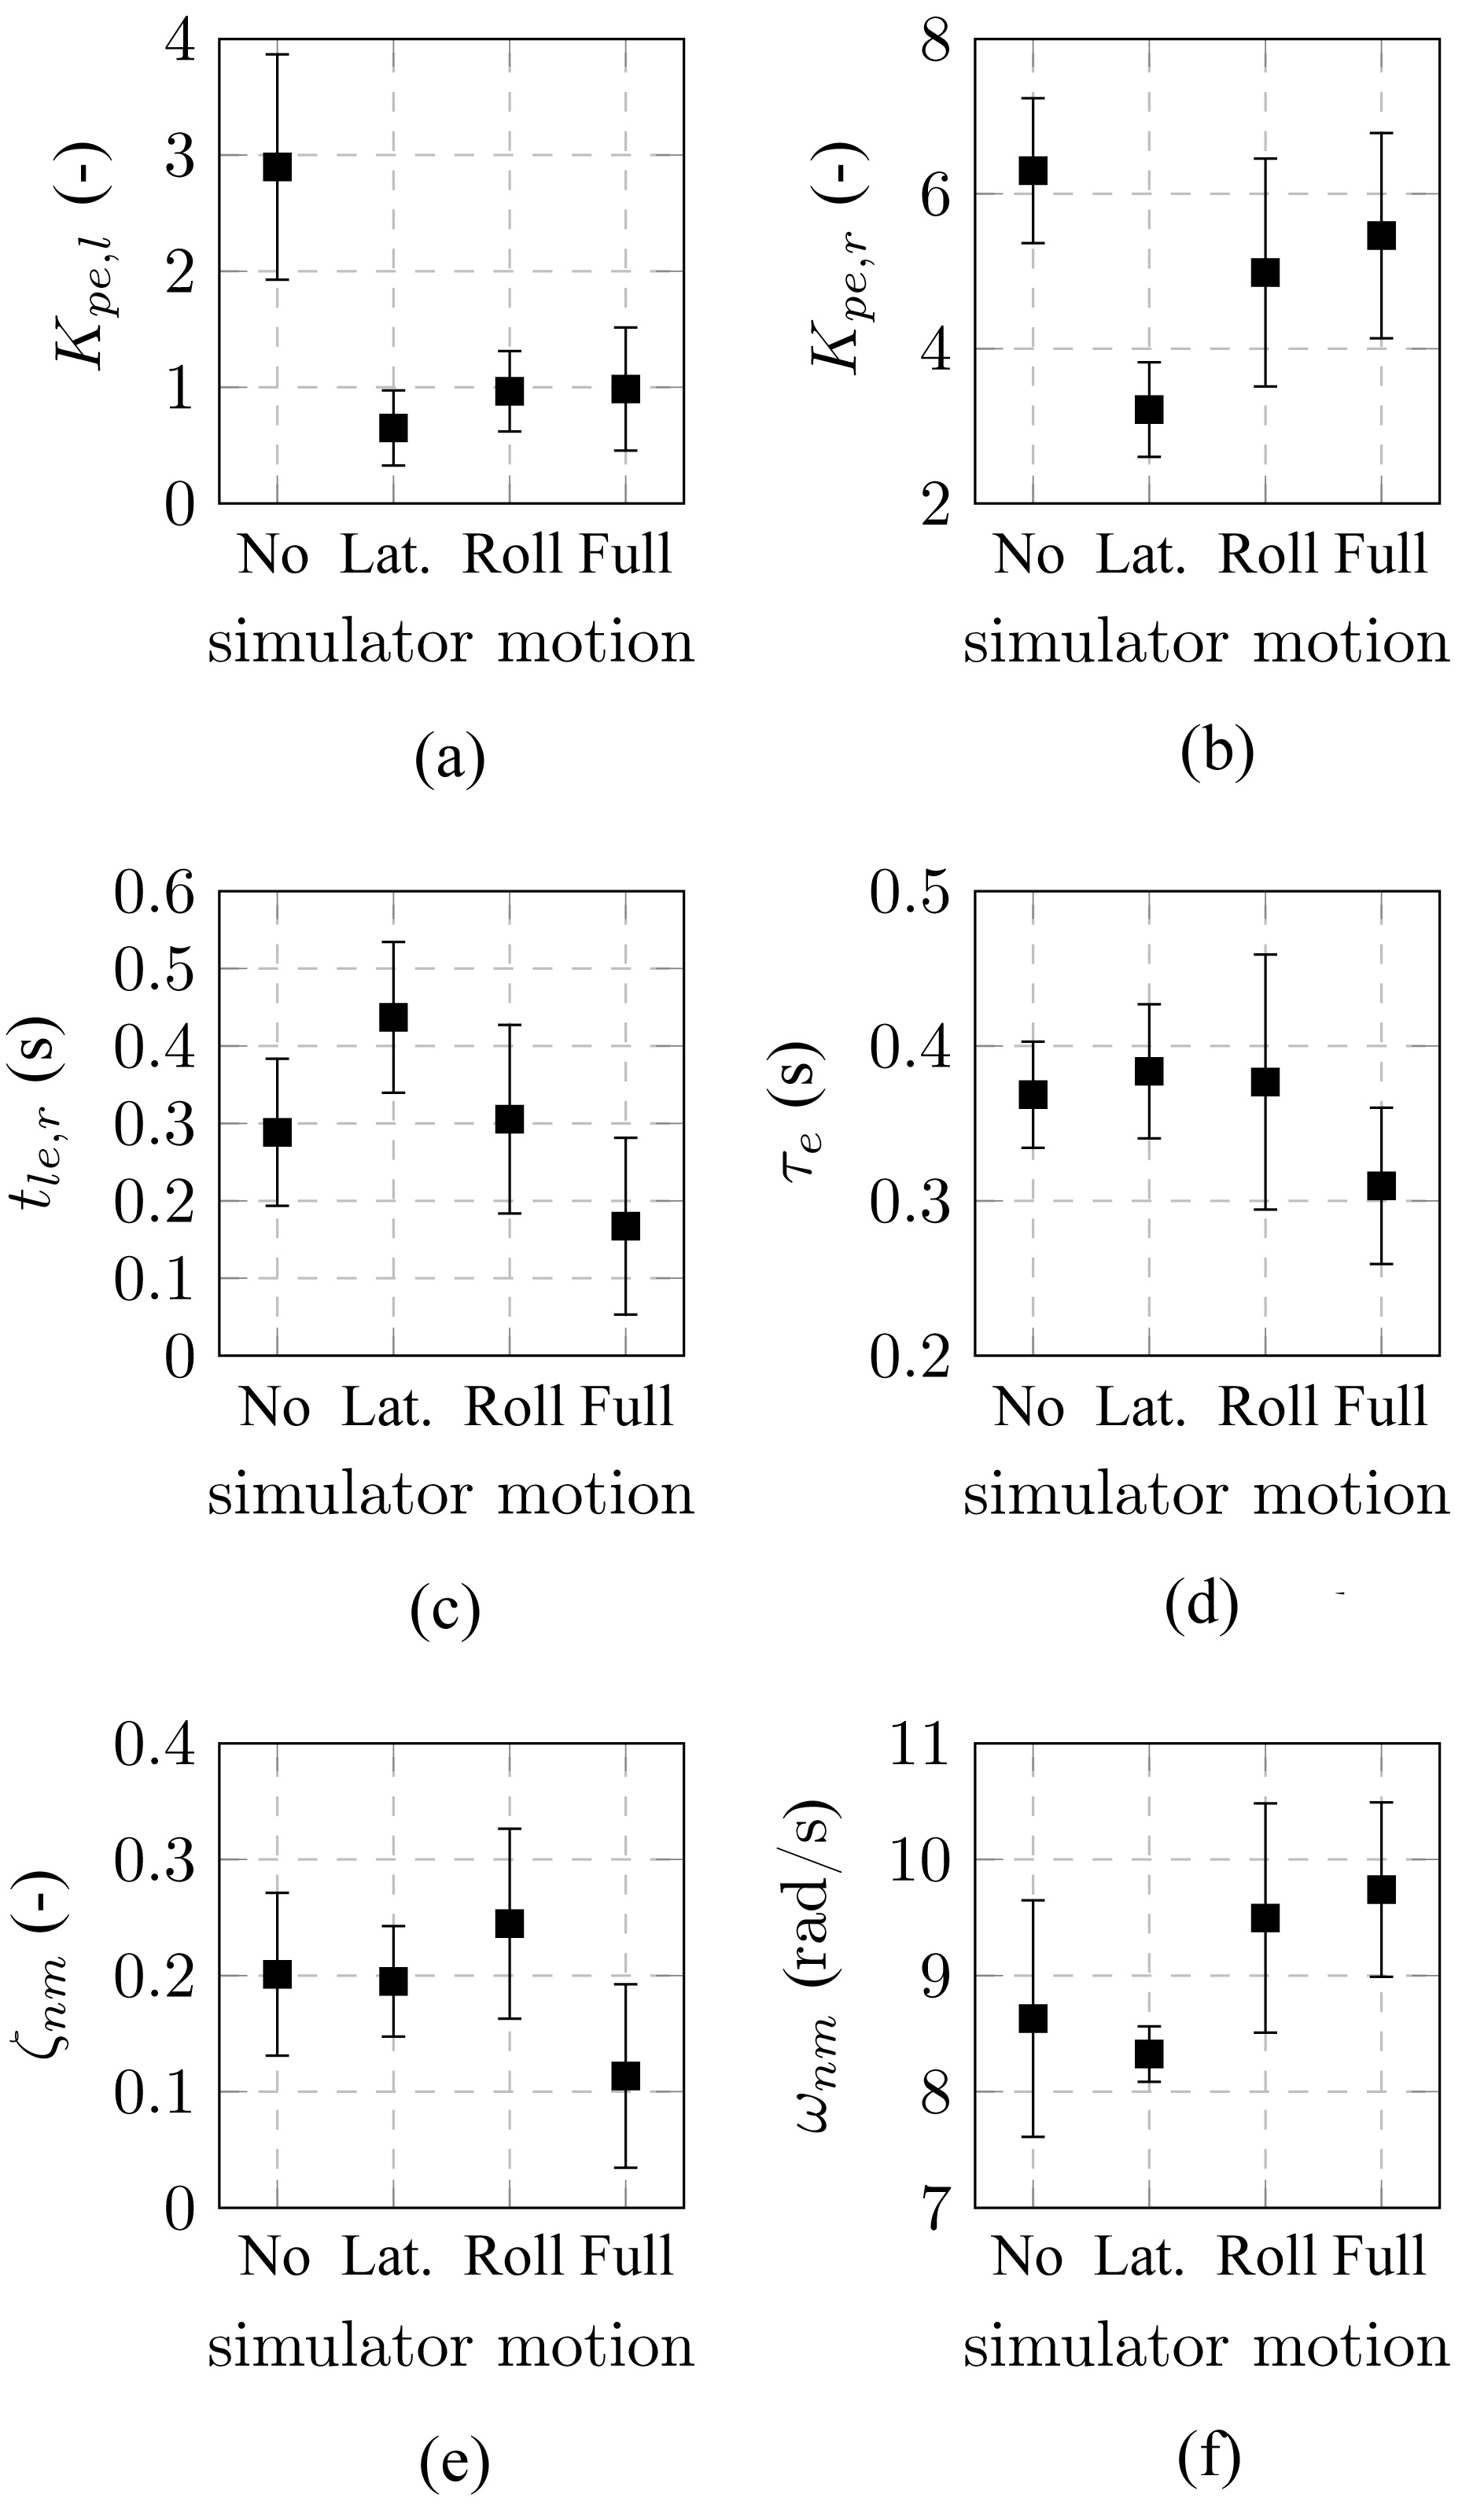 Pilot model parameters of the visual perception path and the neuromuscular dynamics. (a) Lateral error gain, (b) roll error gain, (c) roll error lead, (d) visual time delay, (e) neuromuscular damping, and (f ) neuromuscular frequency.